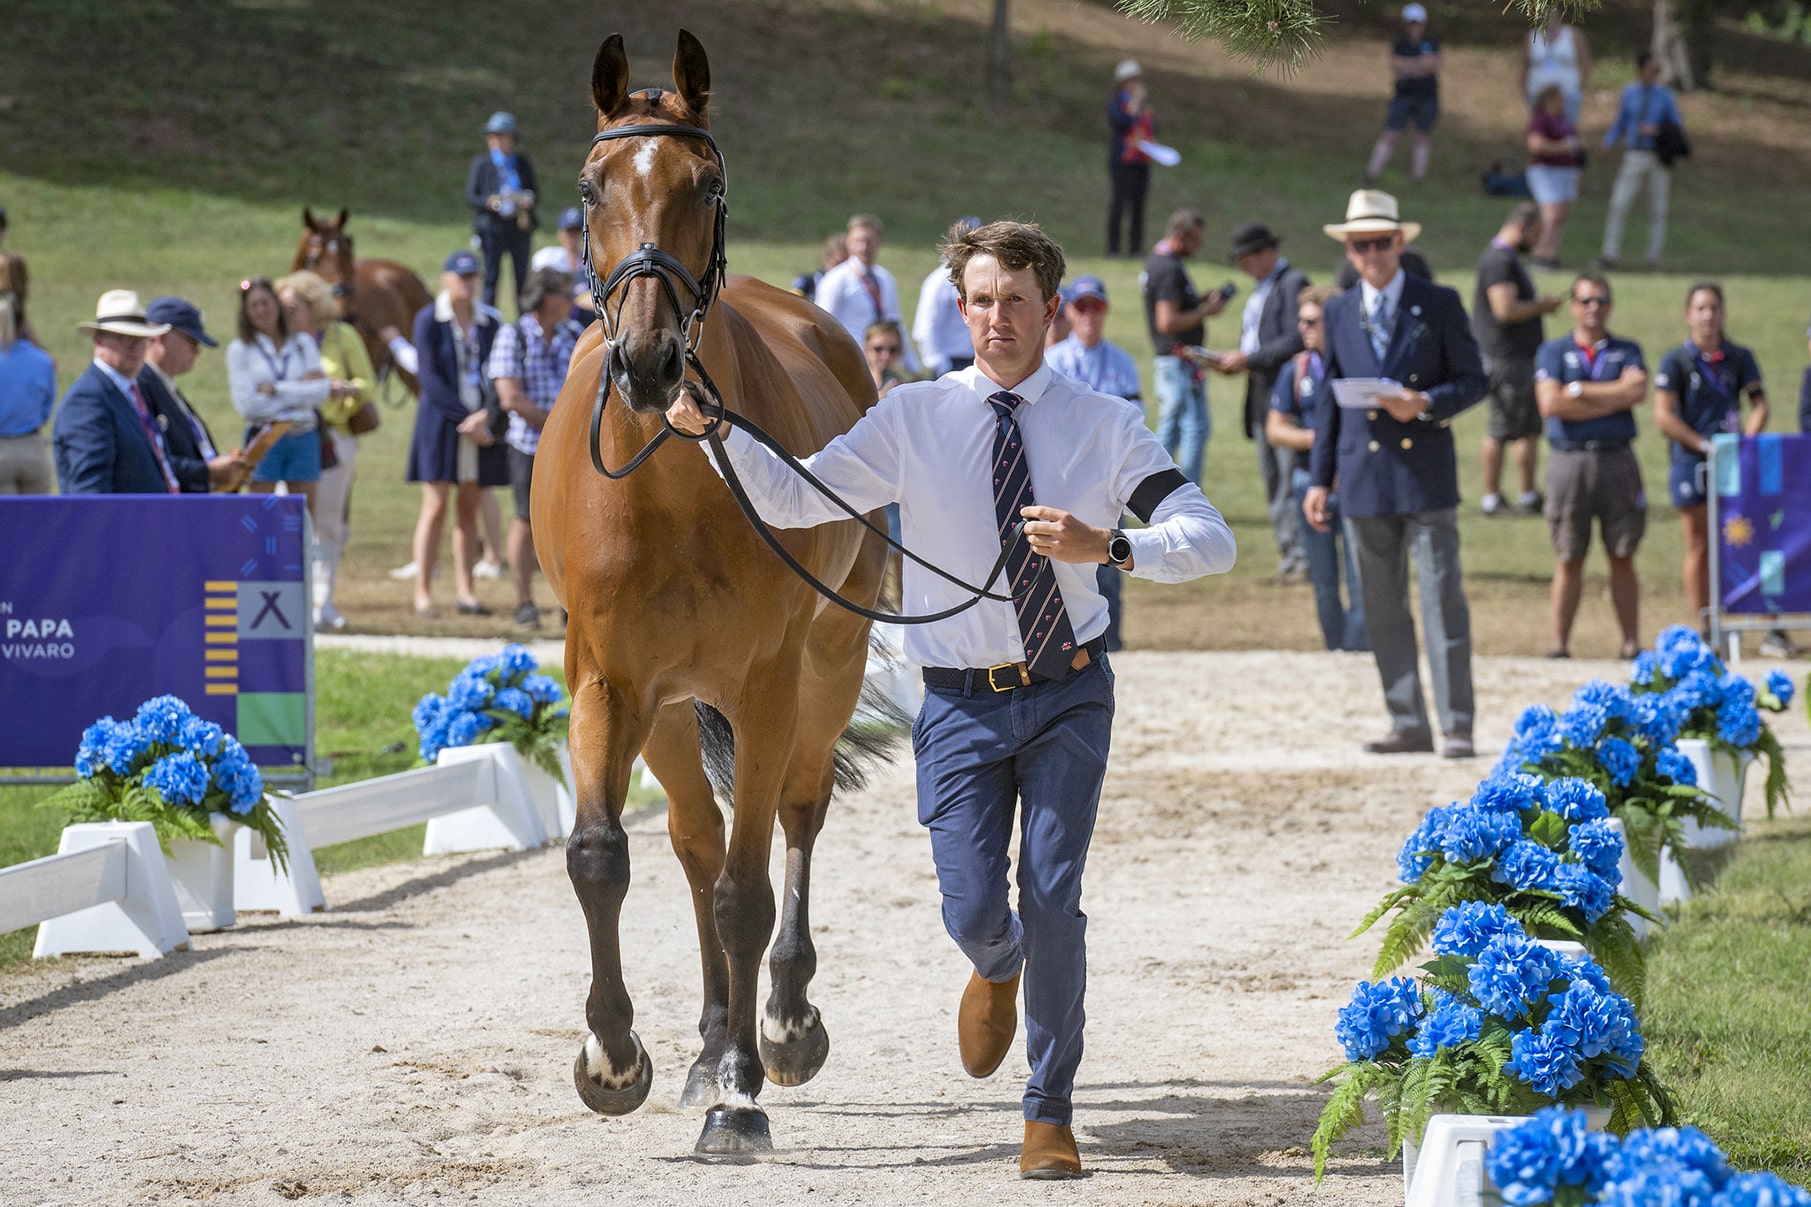 To ensure the health and safety of equine athletes, horses are trotted up and scratched or eliminated from competition if they show signs of lameness (Image courtesy FEI/Richard Juilliart).